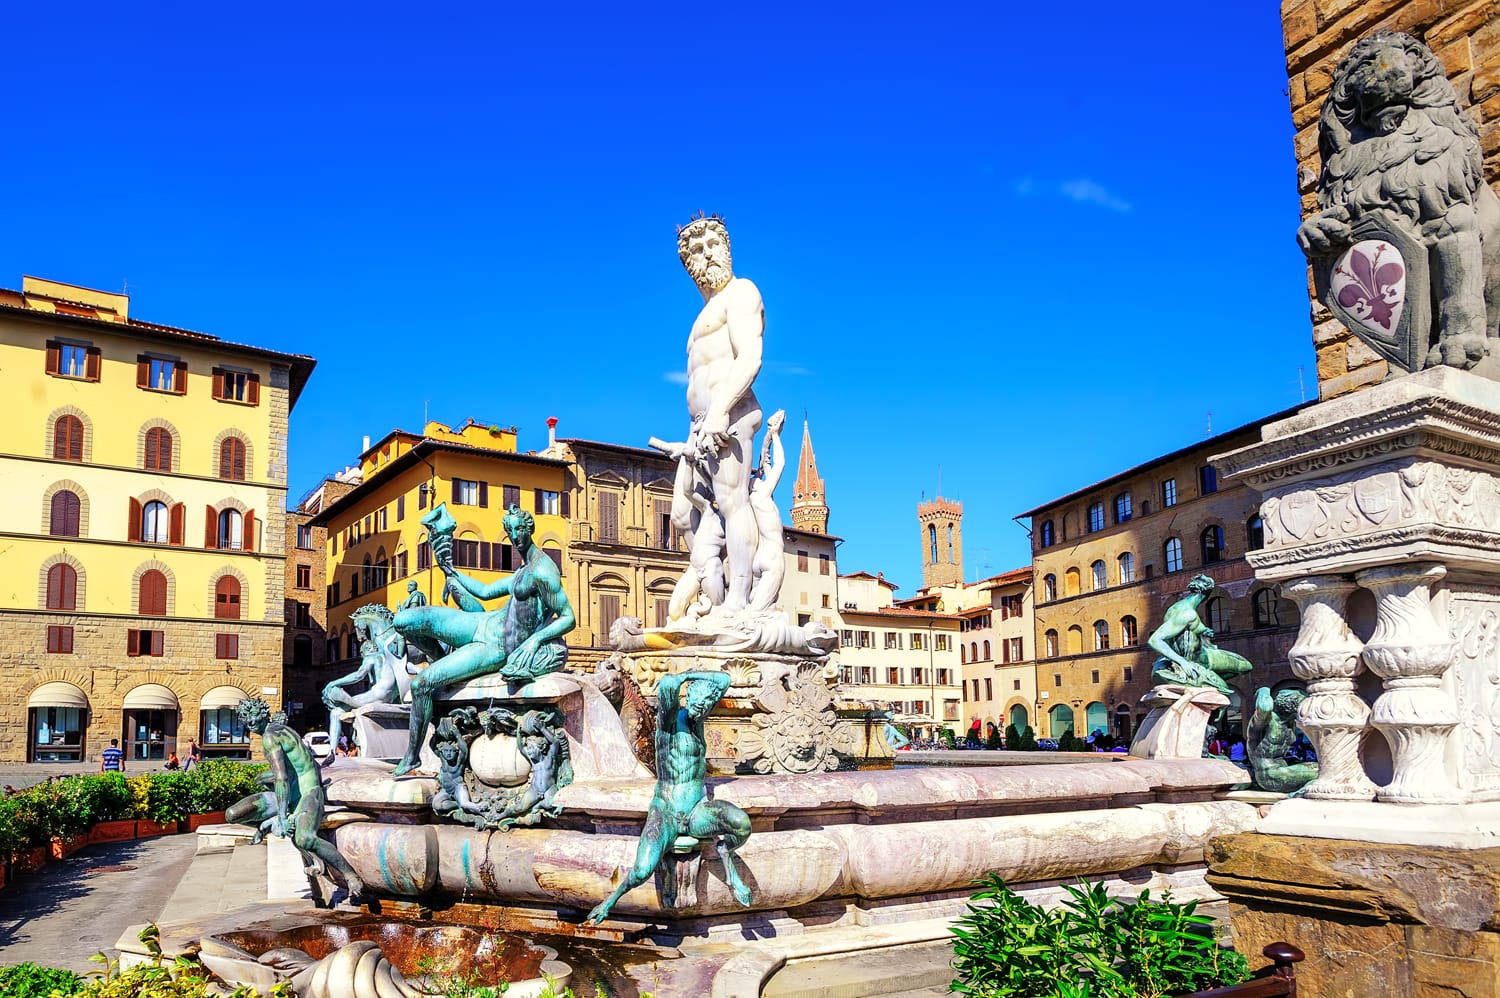 Fountain of Neptune in the olt town center of Florence, Italy